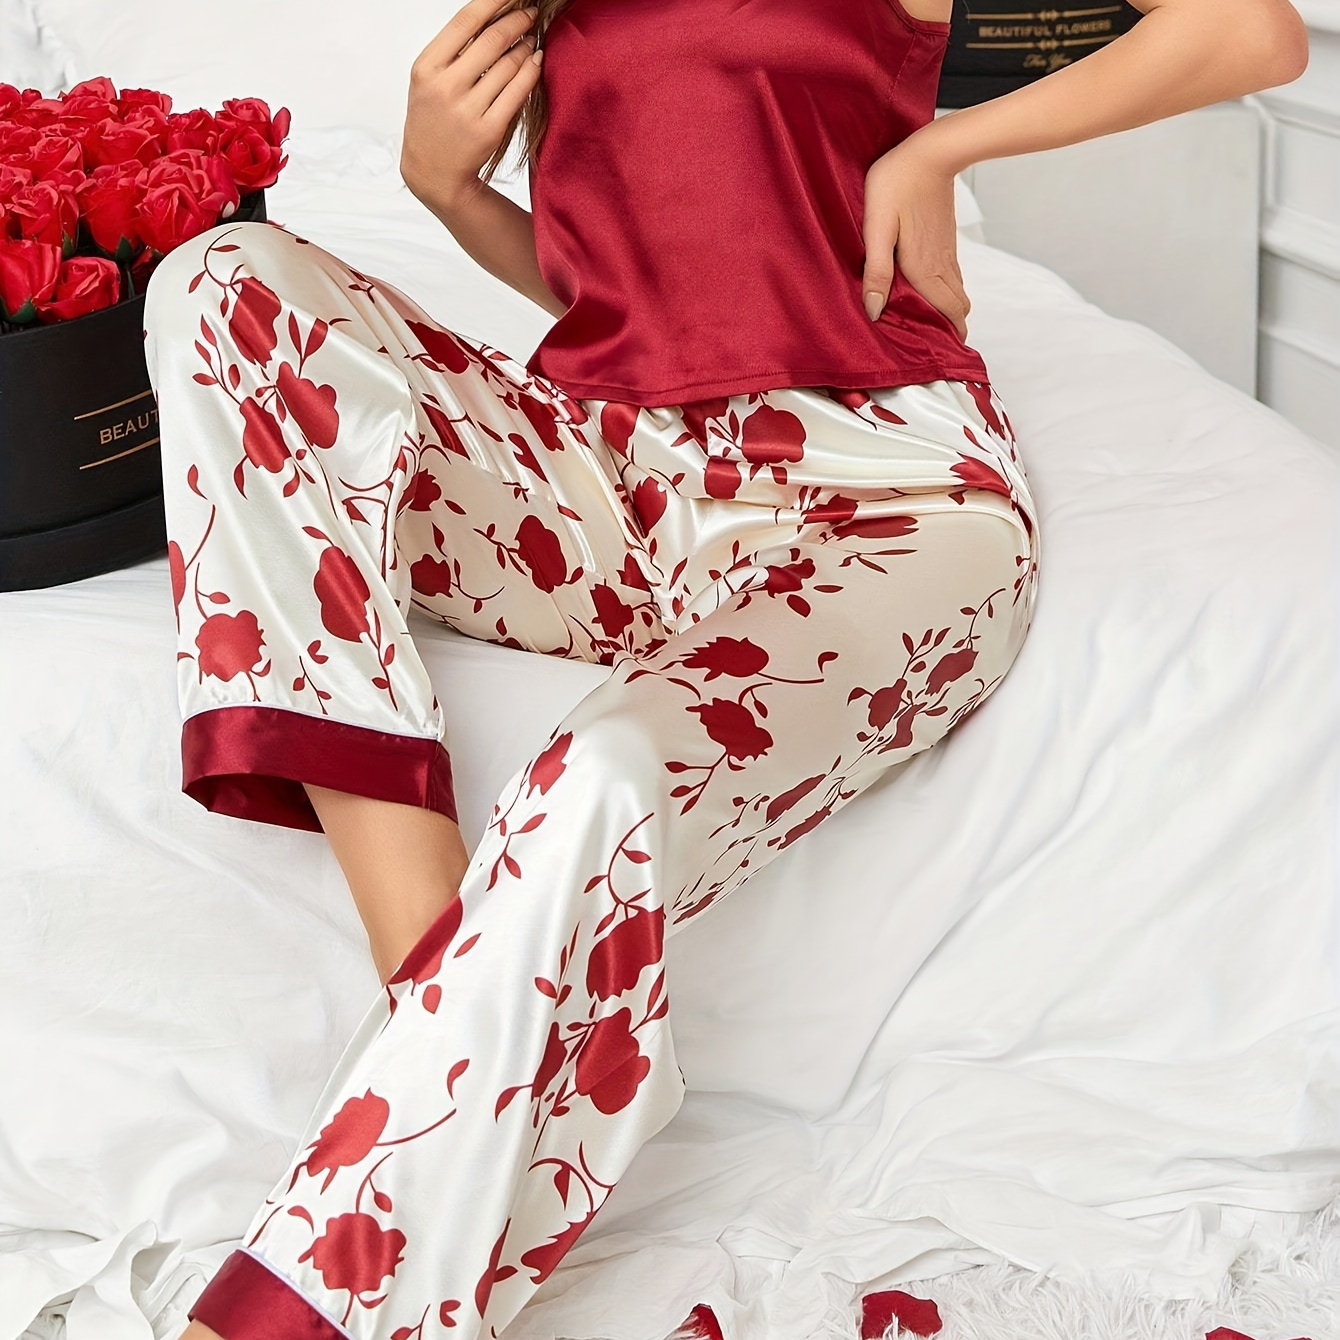 

Women's Floral Print Satin Elegant Pajama Set, V Neck Backless Cami Top & Pants, Comfortable Relaxed Fit